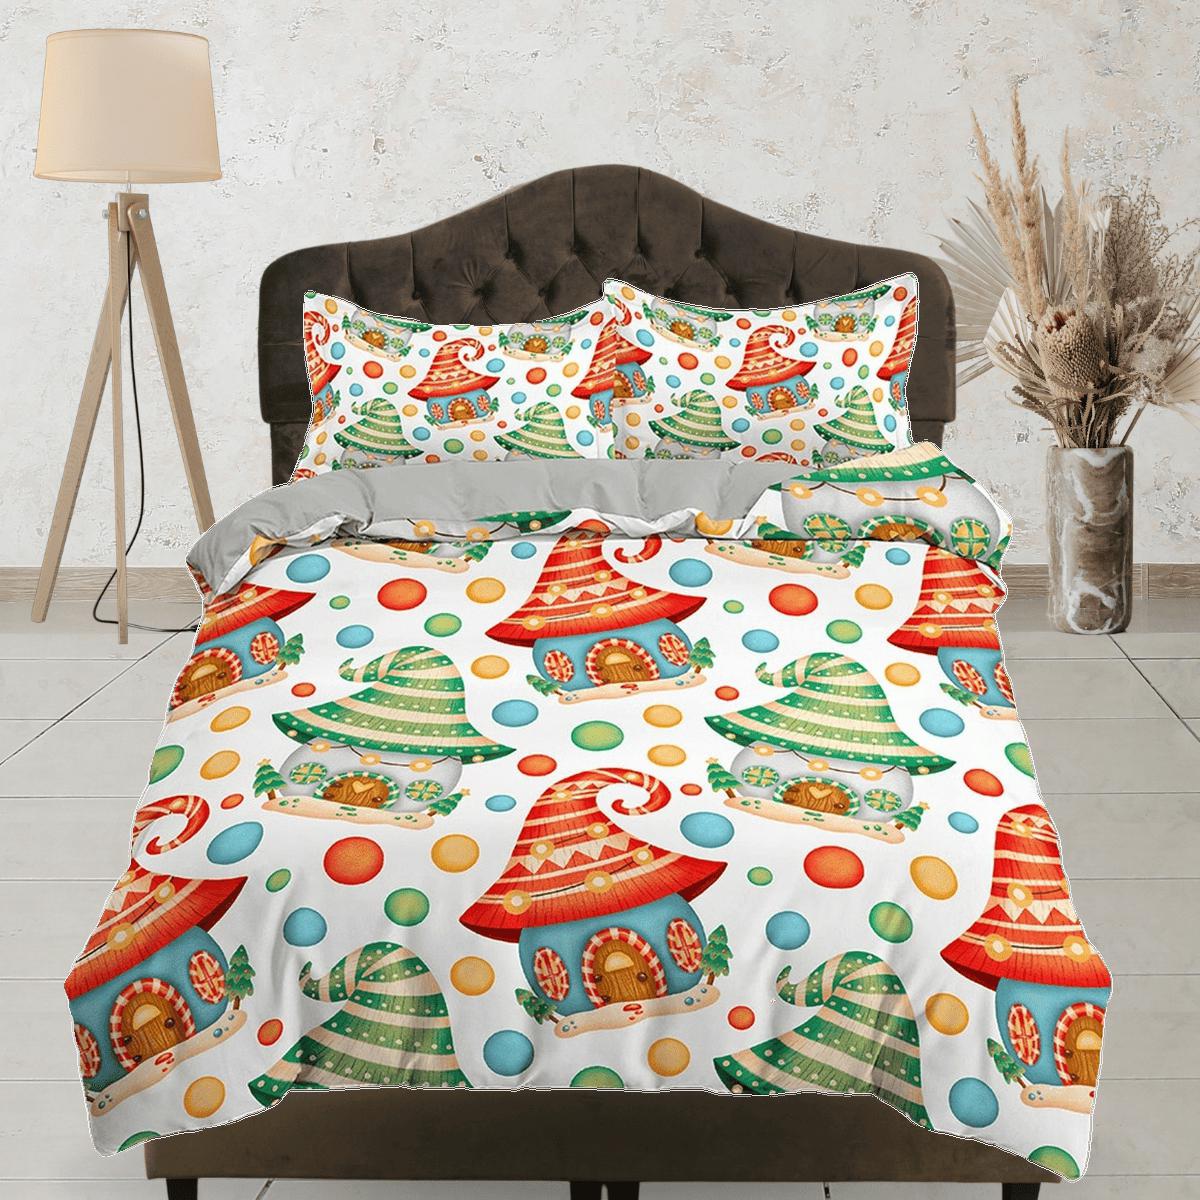 daintyduvet Cute dwarf house colorful duvet cover set, christmas full size bedding & pillowcase, college bedding, crib toddler bedding, holiday gift